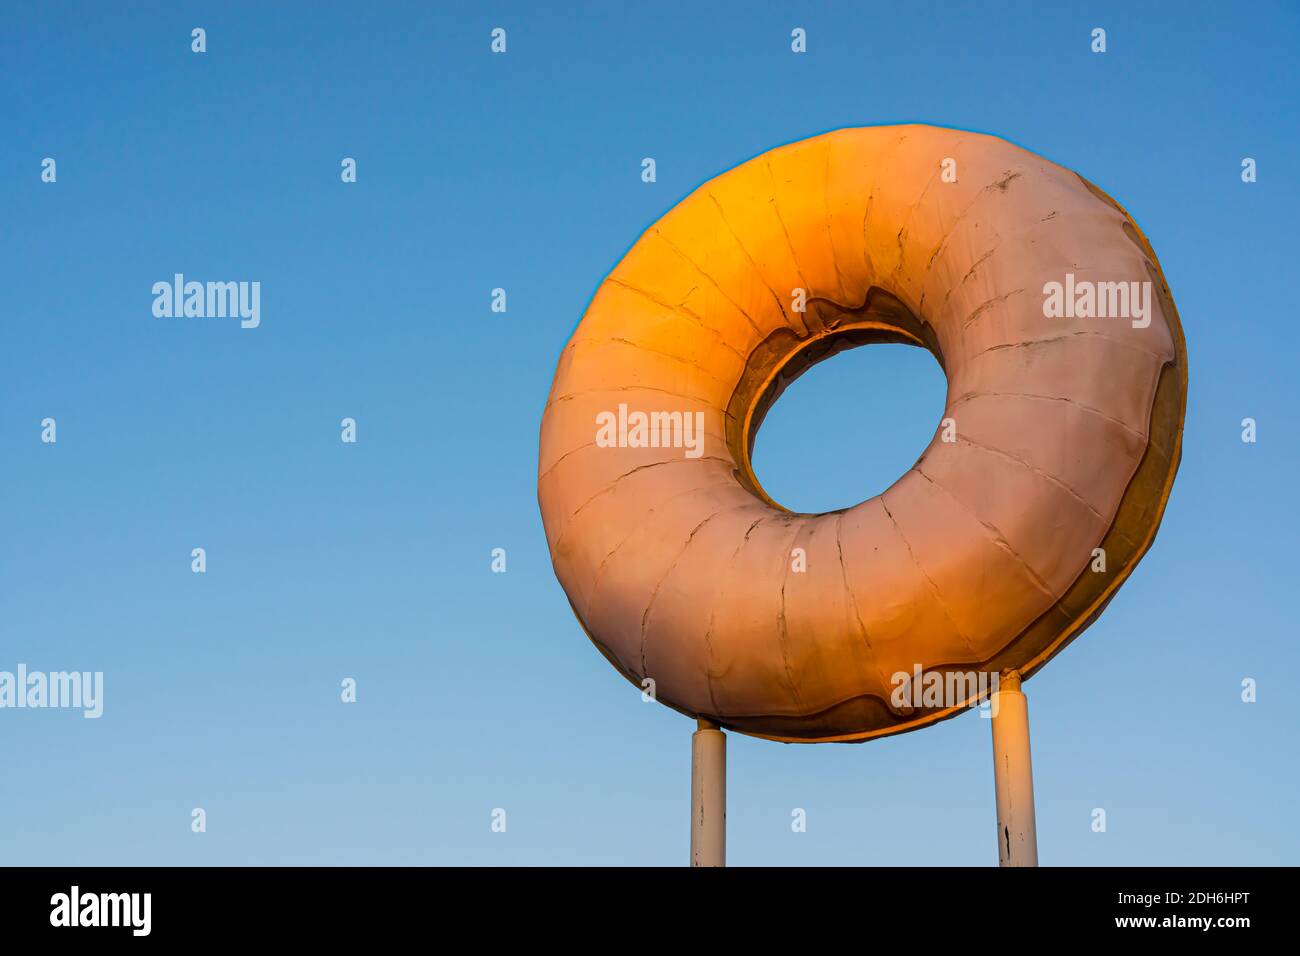 Large Donut Display Outside Donut Shop Stock Photo